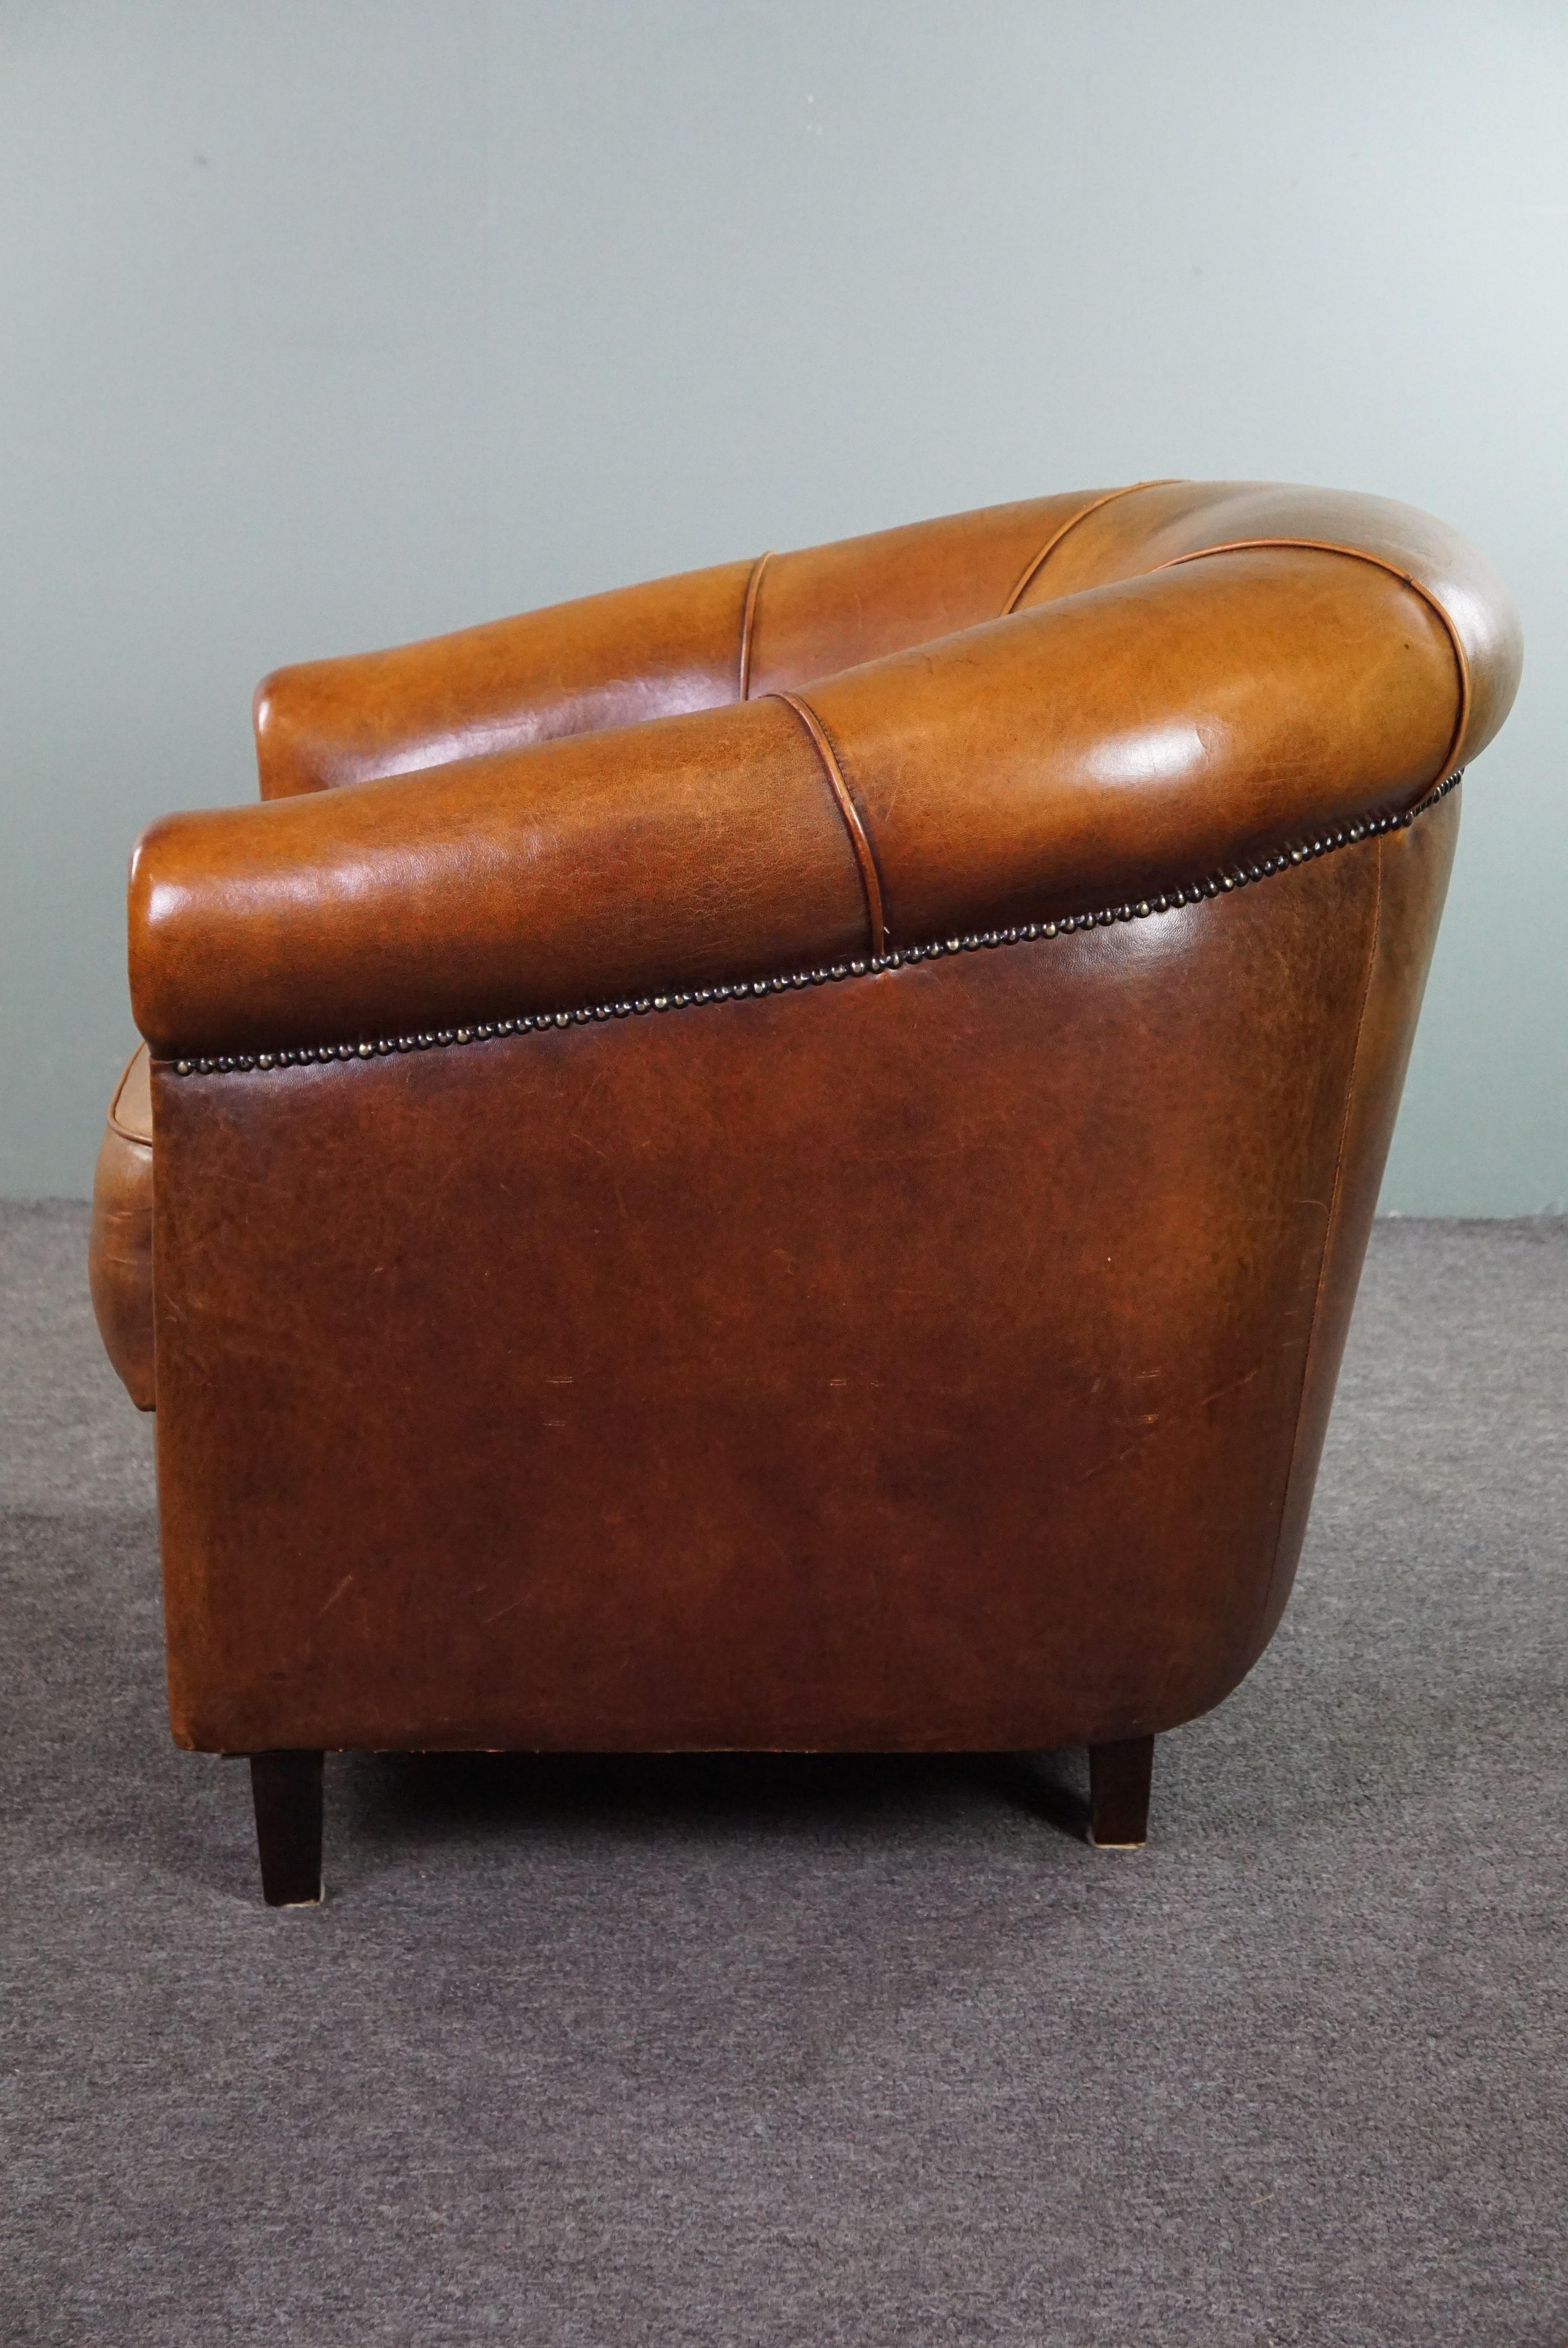 Offered is this sheepskin club armchair with a fixed seat cushion and beautiful colors.

This sheepskin club armchair is like a direct invitation to sit down. This is partly due to its inviting appearance; you'll want to sit in it immediately! With